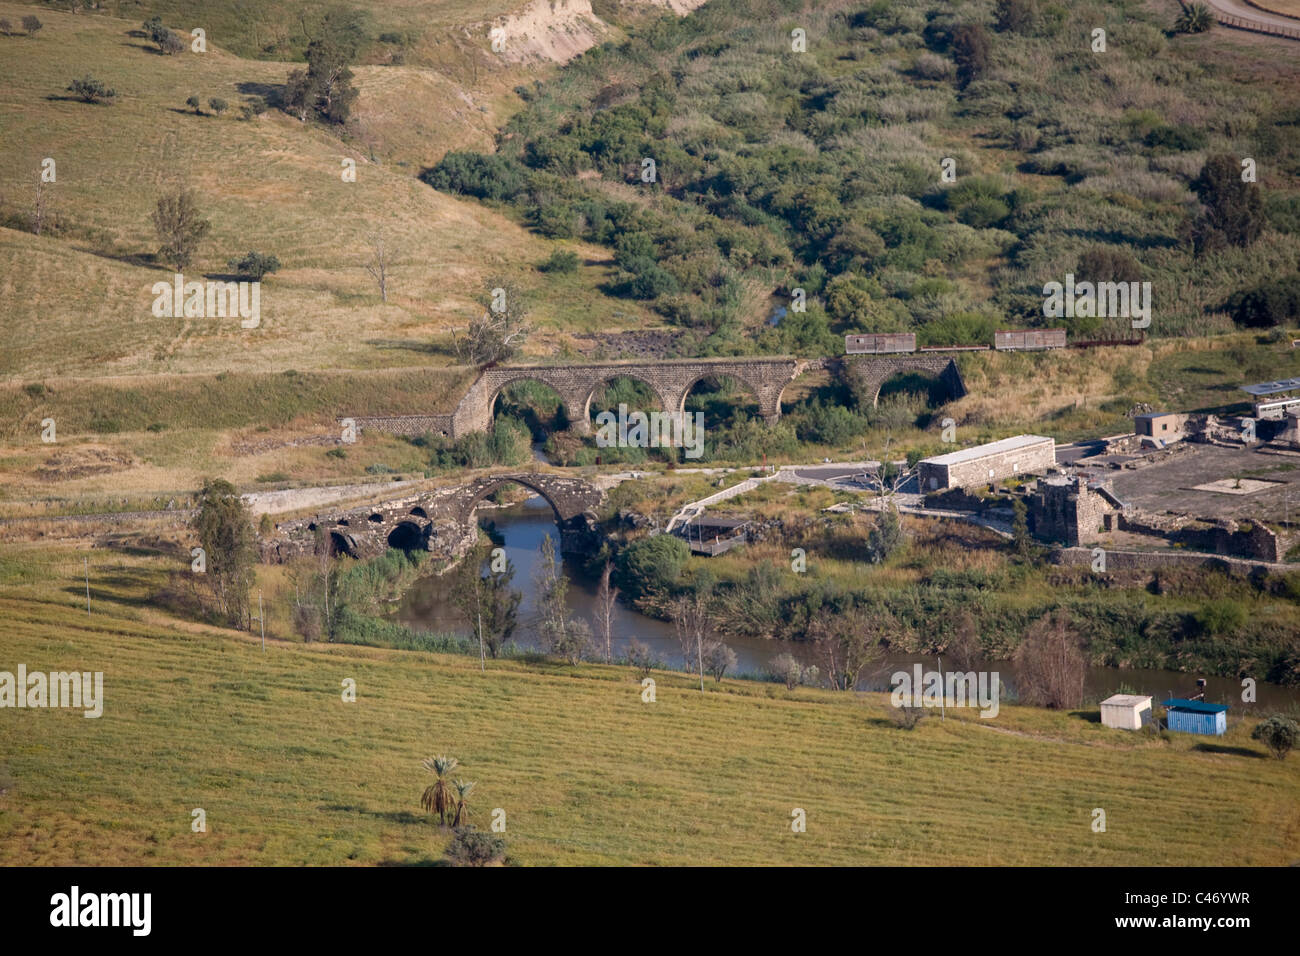 Aerial photograph of the old Turkish bridge in the Jordan Valley Stock Photo